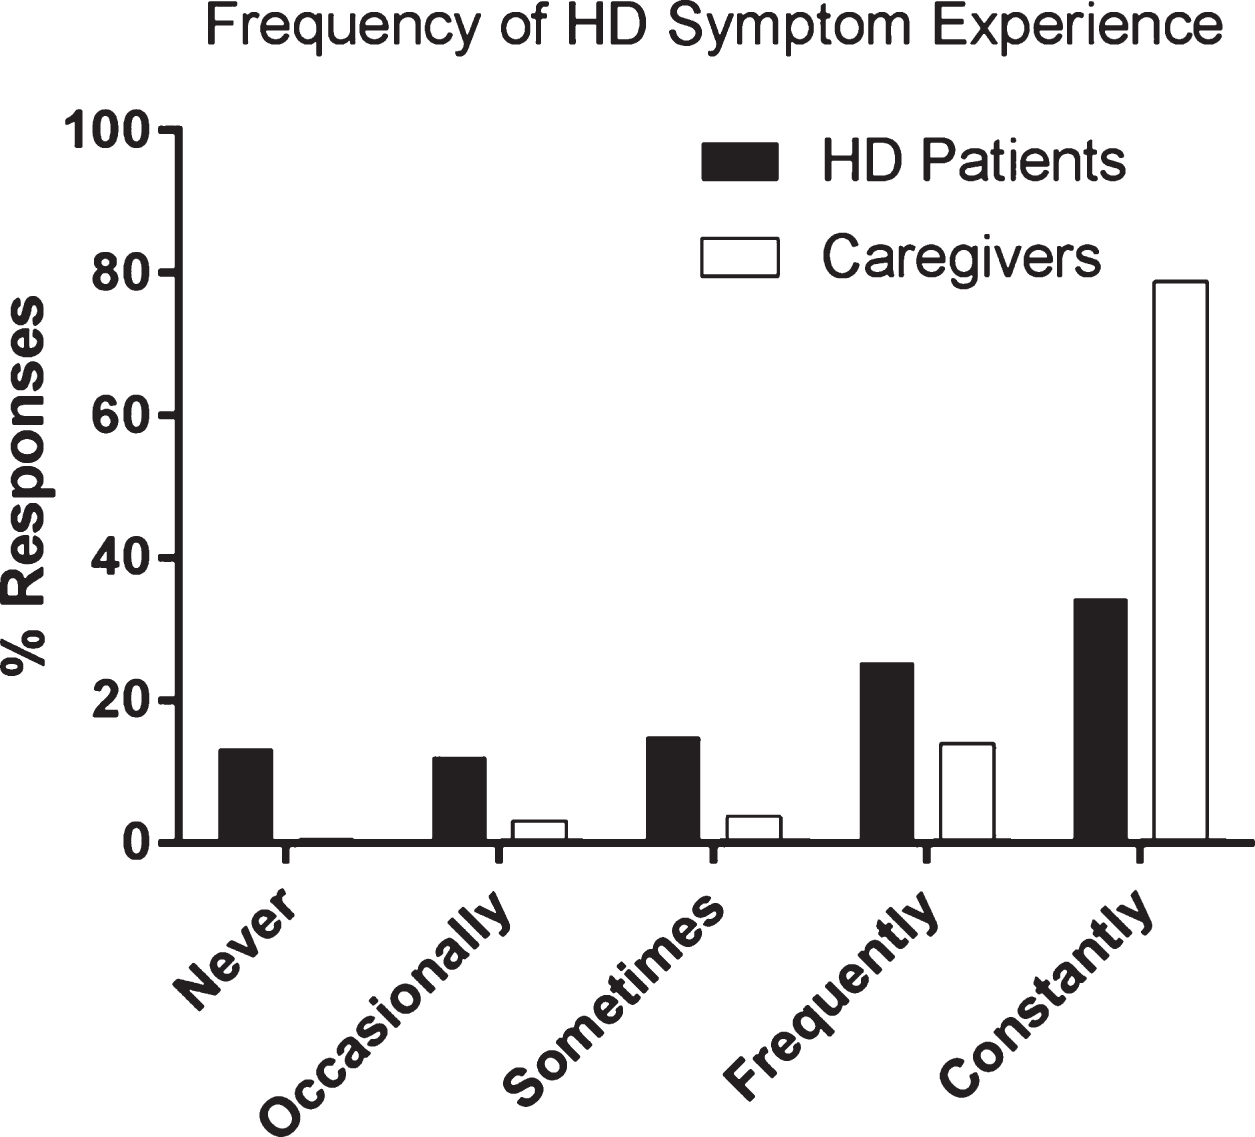 HD patient and caregiver perspectives on frequency of HD symptom experience. HD patient (N = 248), HD caregiver (N = 731).